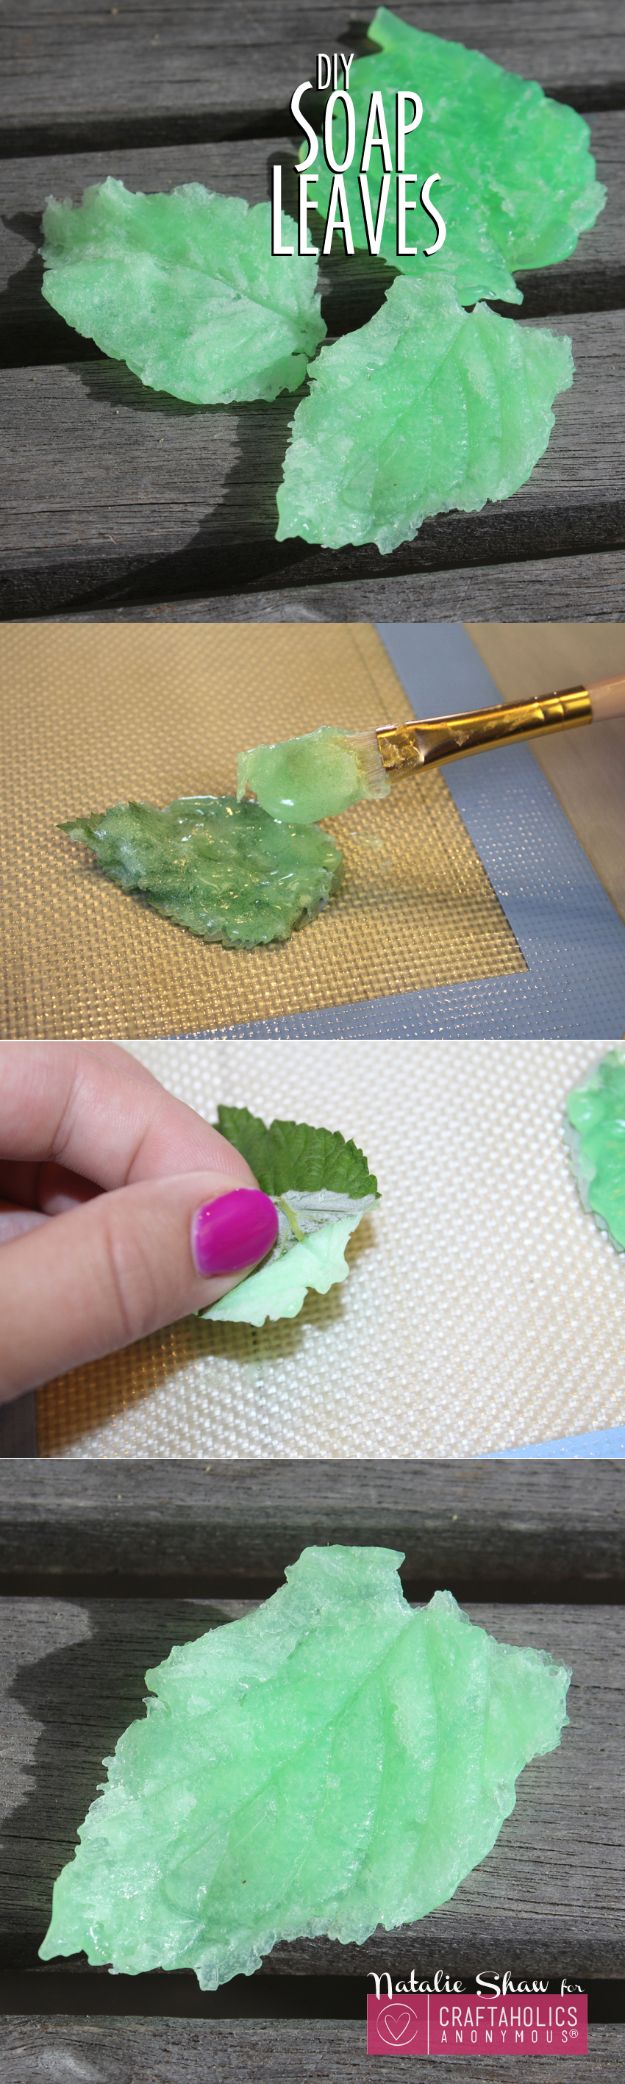 Soap Recipes DIY - DIY Soap Leaves - DIY Soap Recipe Ideas - Best Soap Tutorials for Soap Making Without Lye - Easy Cold Process Melt and Pour Tips for Beginners - Crockpot, Essential Oils, Homemade Natural Soaps and Products - Creative Crafts and DIY for Teens, Kids and Adults #soaprecipes #diygifts #soapmaking